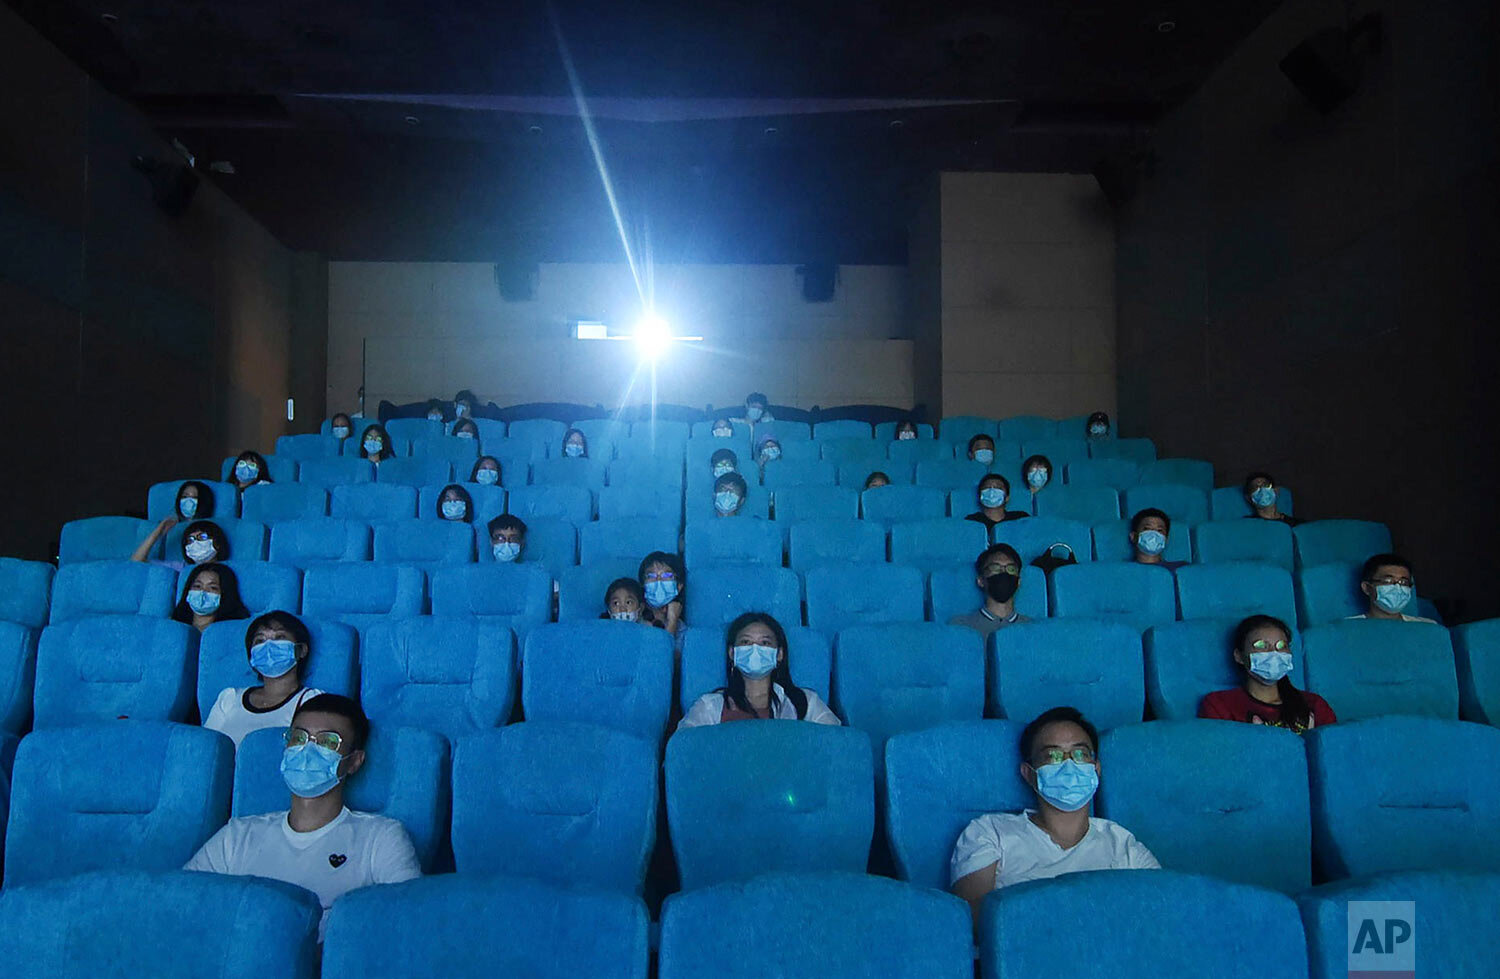  Movie-goers wearing masks to protect themselves from the coronavirus are spaced apart as they watch a movie in a newly reopened cinema in Hangzhou in eastern China's Zhejiang province on Monday, July 20, 2020.  (Chinatopix via AP) 